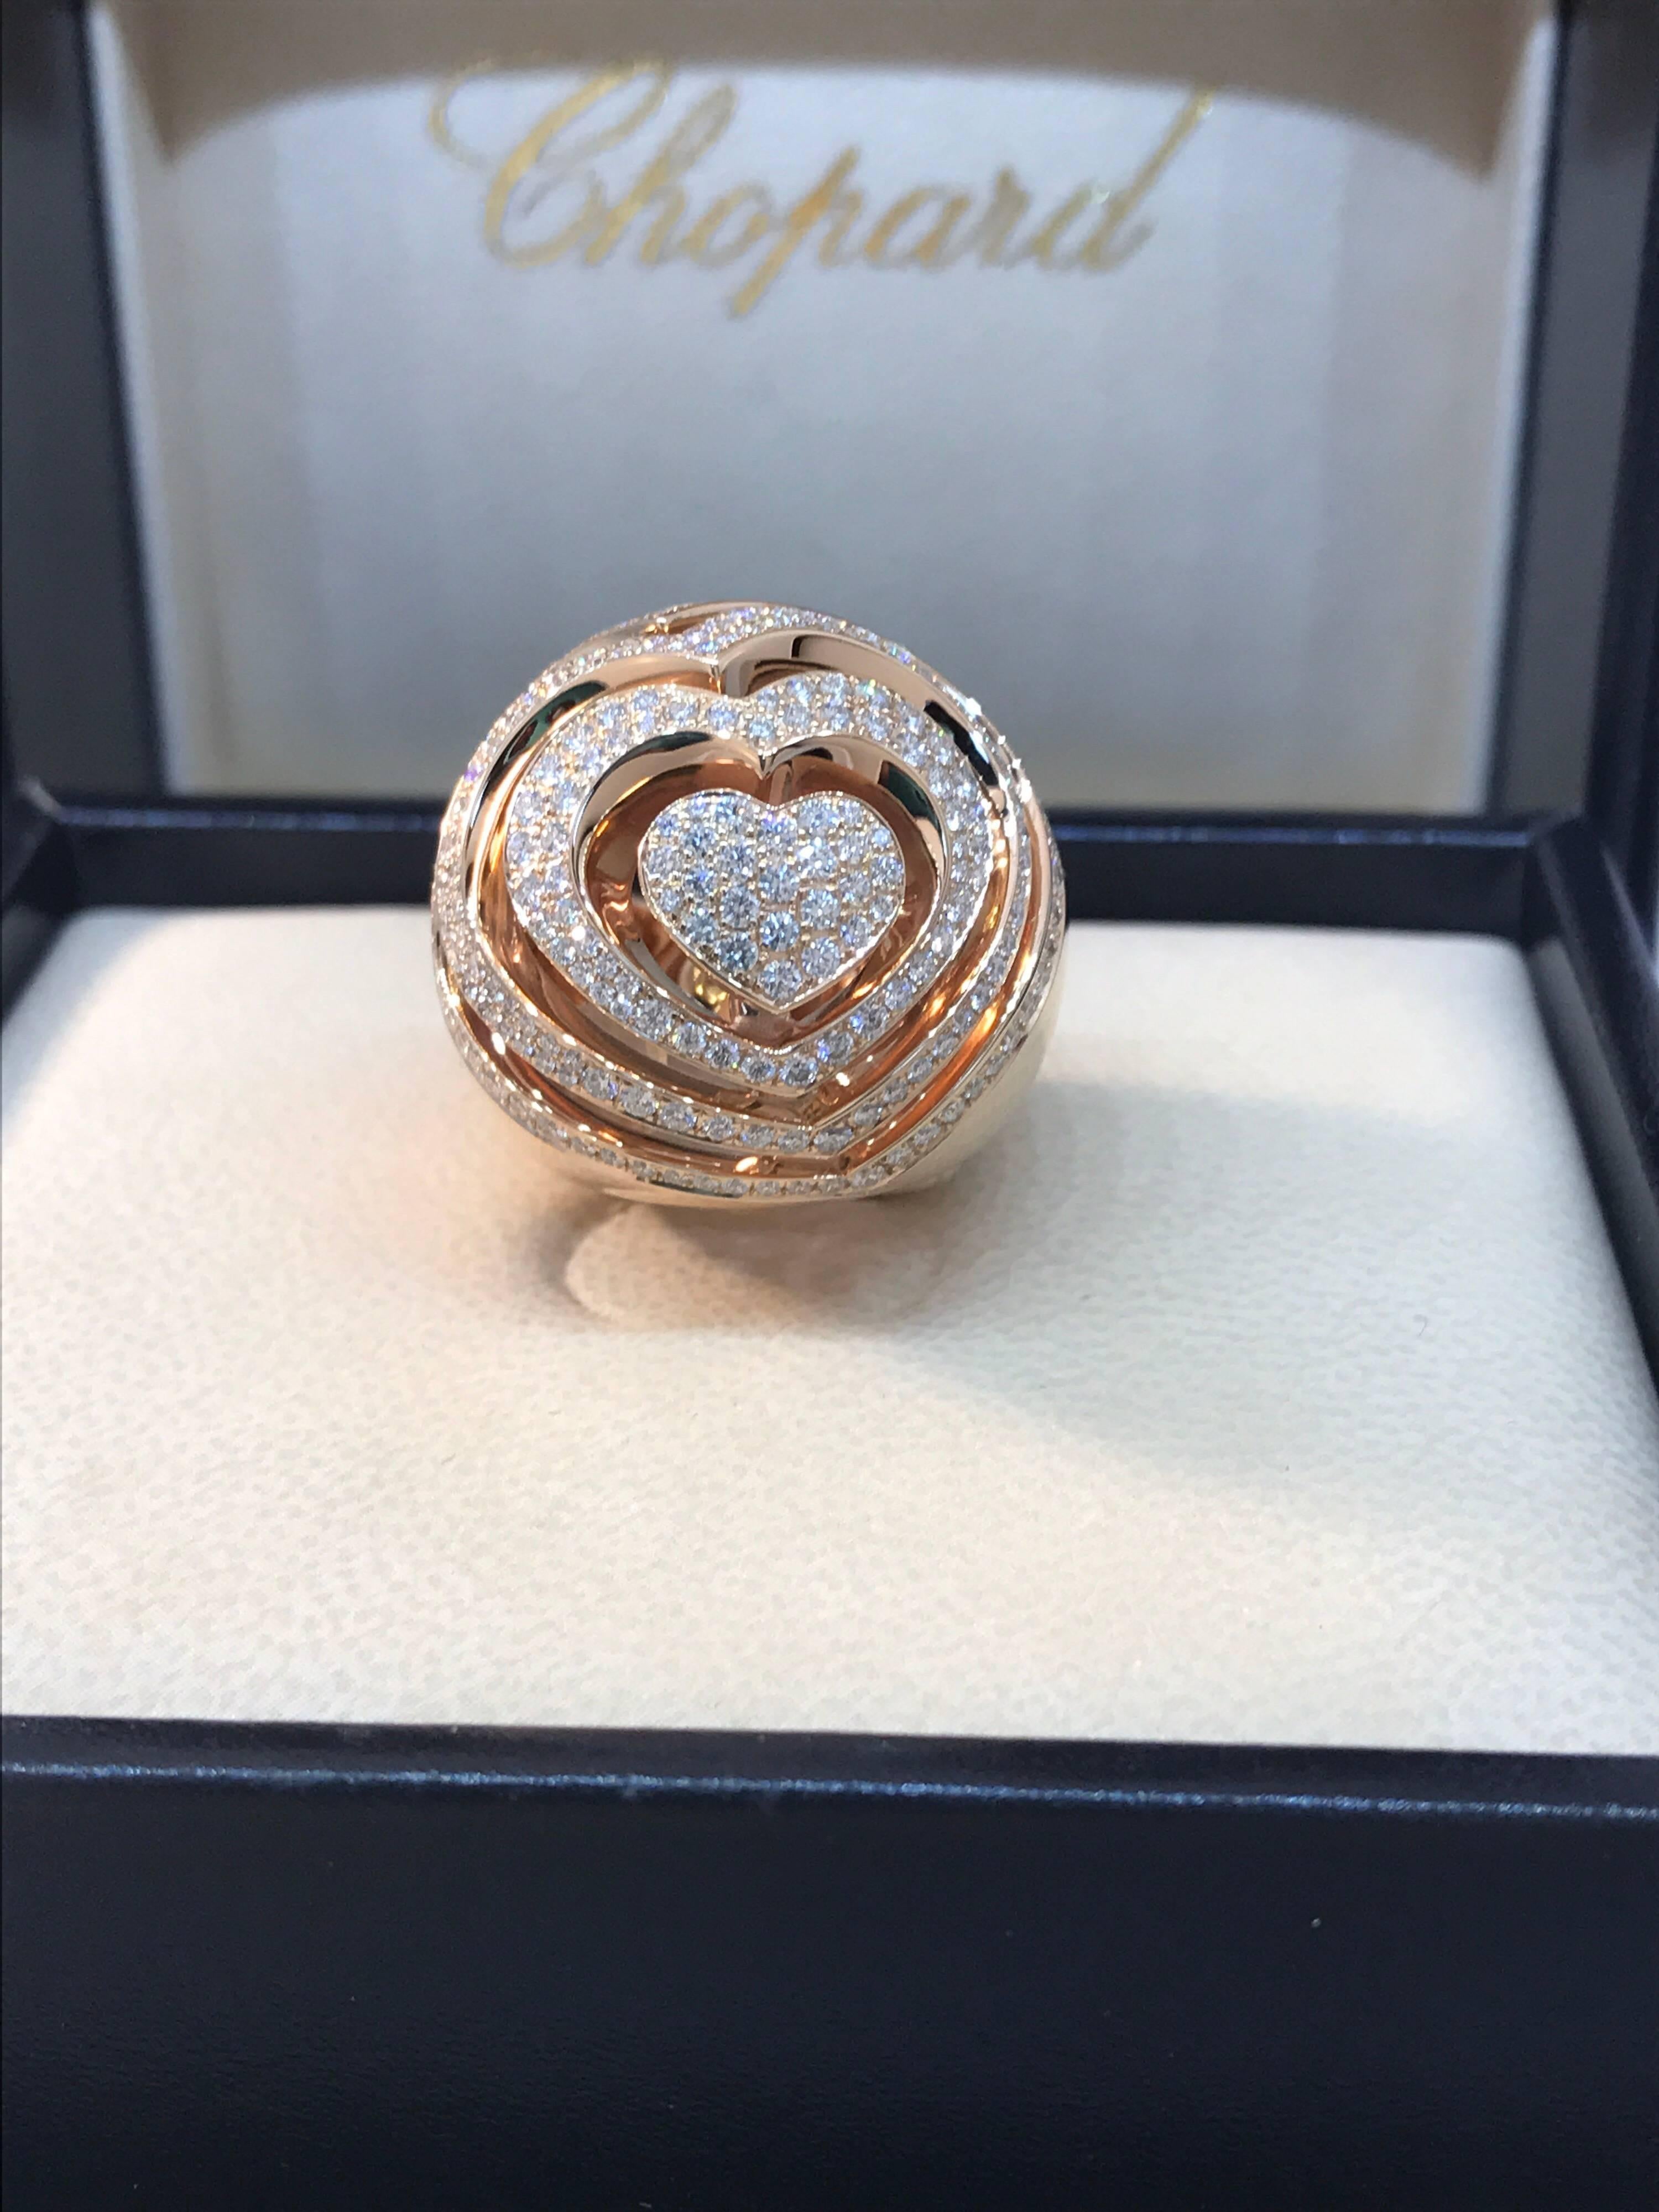 Chopard Xtravaganza Ring

Model Number: 82/7215-5110

100% Authentic

Brand New

Comes with original Chopard box, certificate of authenticity and warranty and jewels manual

18 Karat Rose Gold 

Ring Weight: 32.40gr

246 Diamonds on the ring (1.71